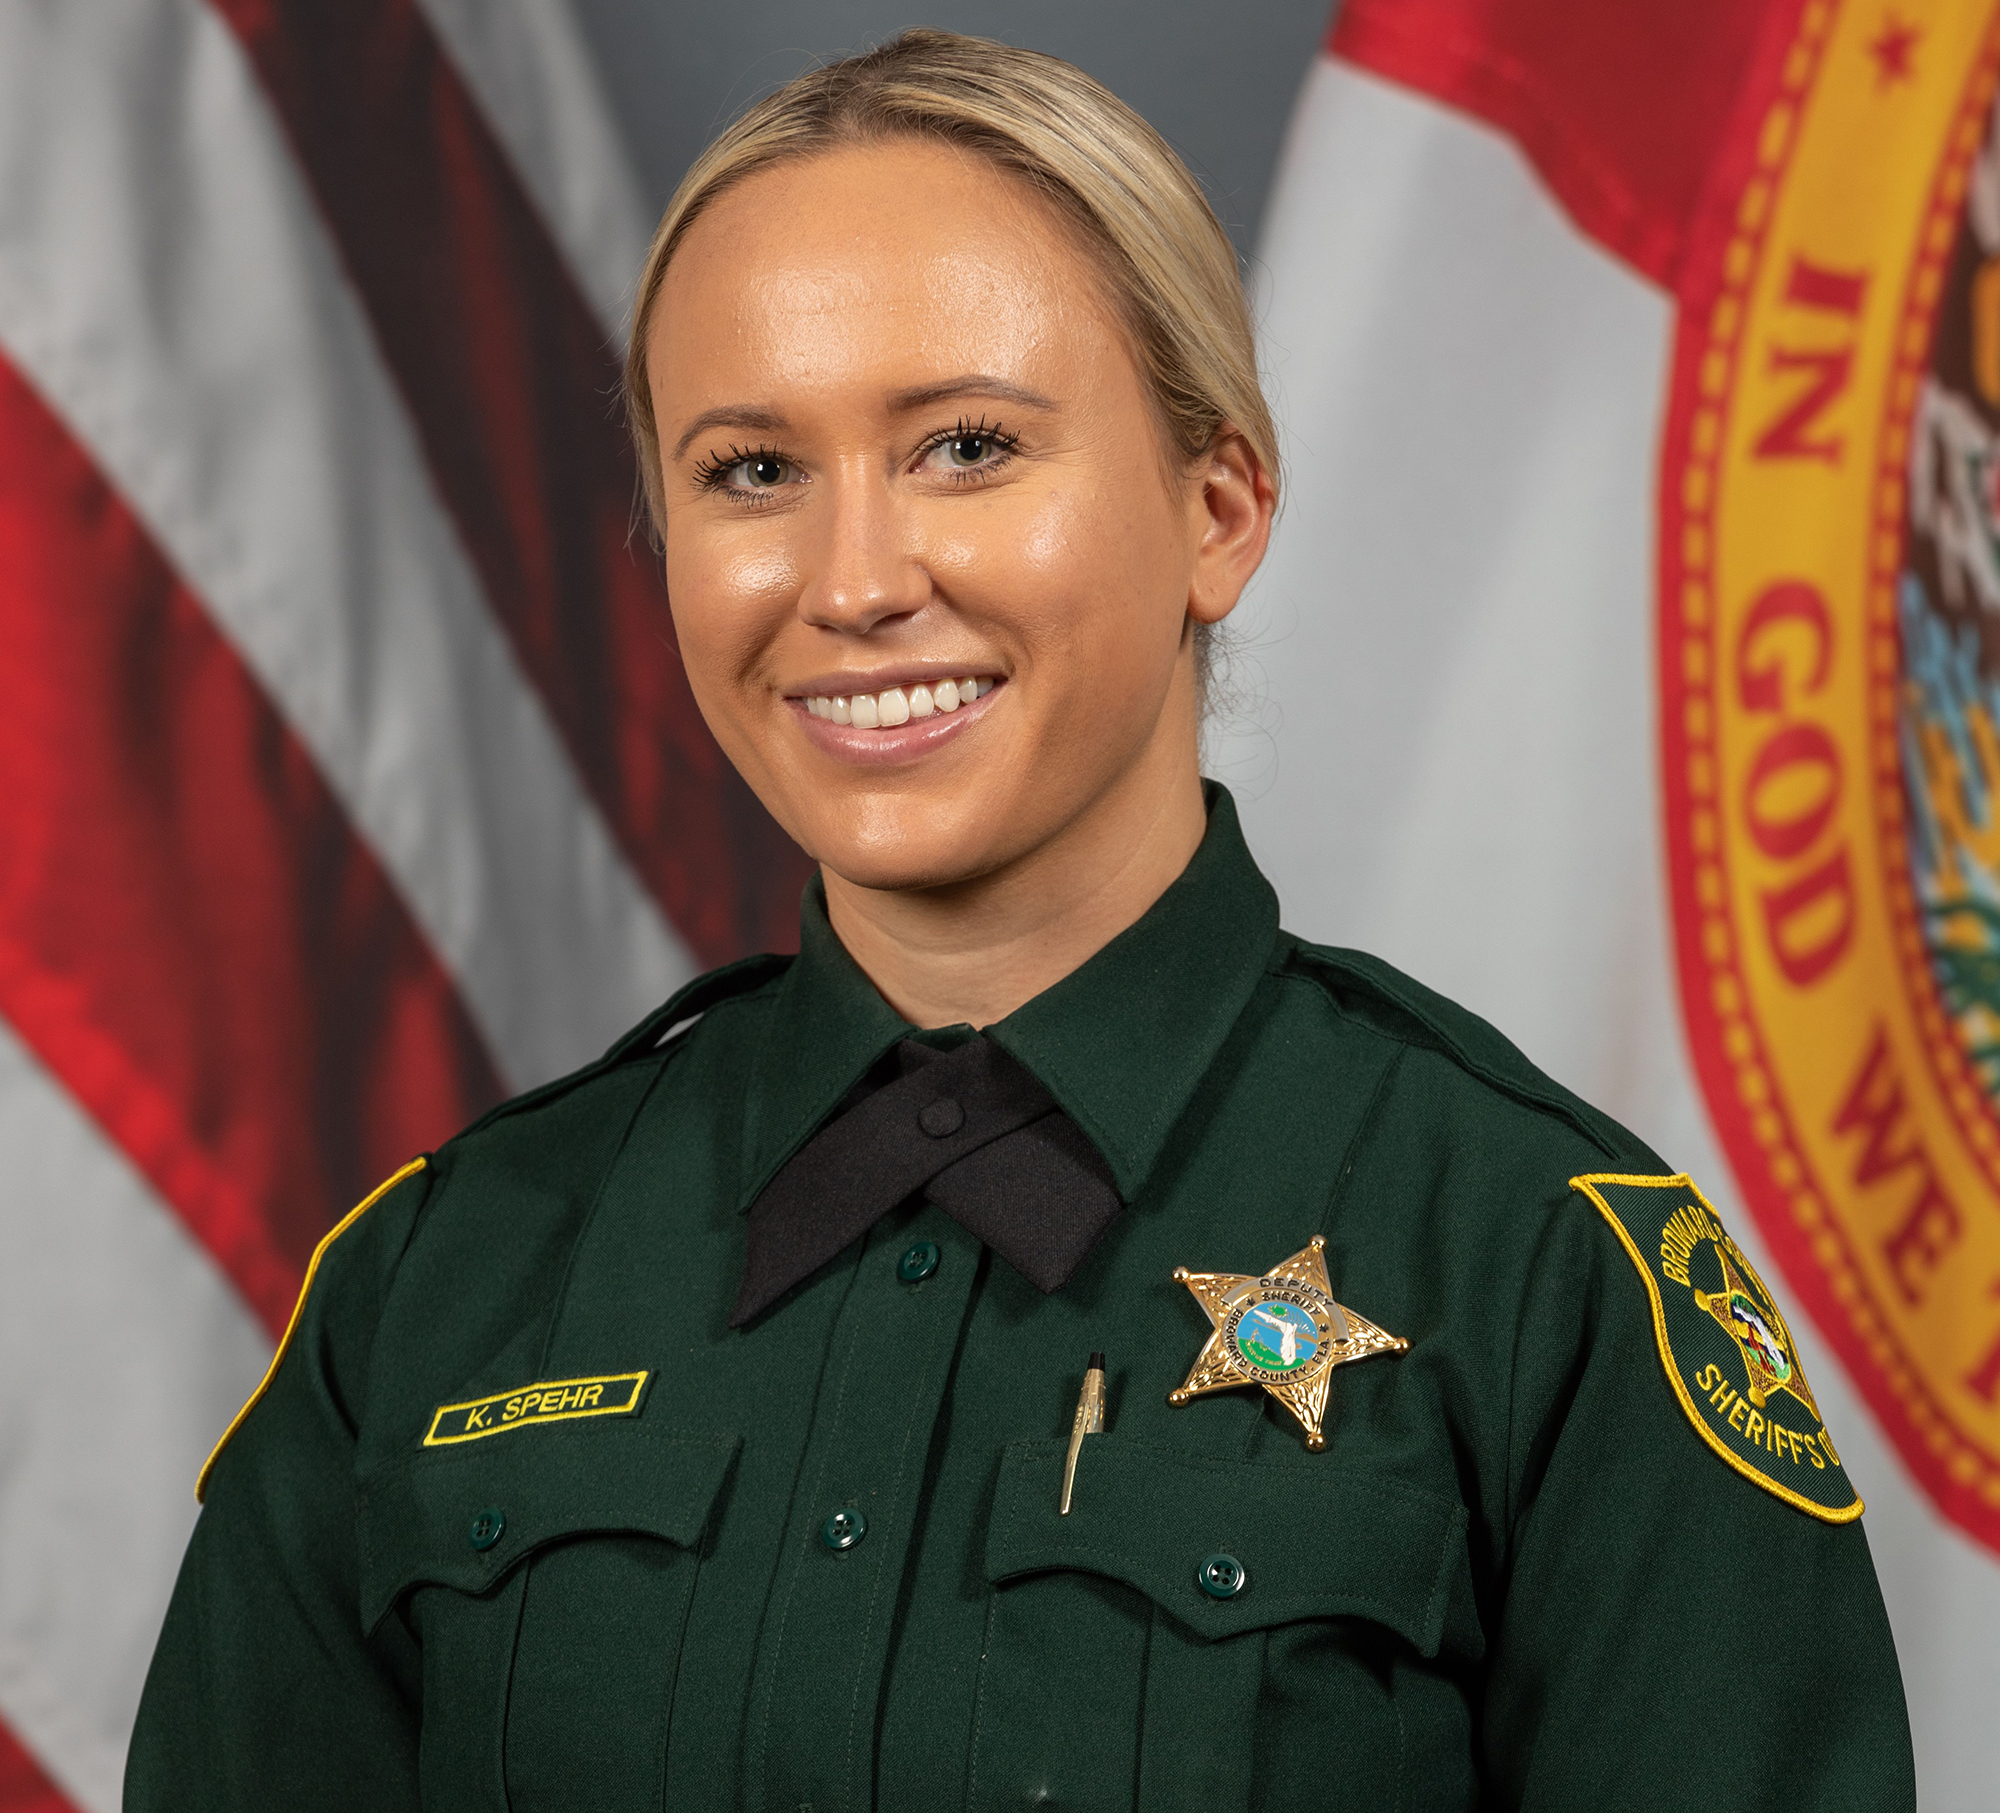 Tamarac BSO Welcomes Deputy Kaitlin Spehr as its New Community Liaison